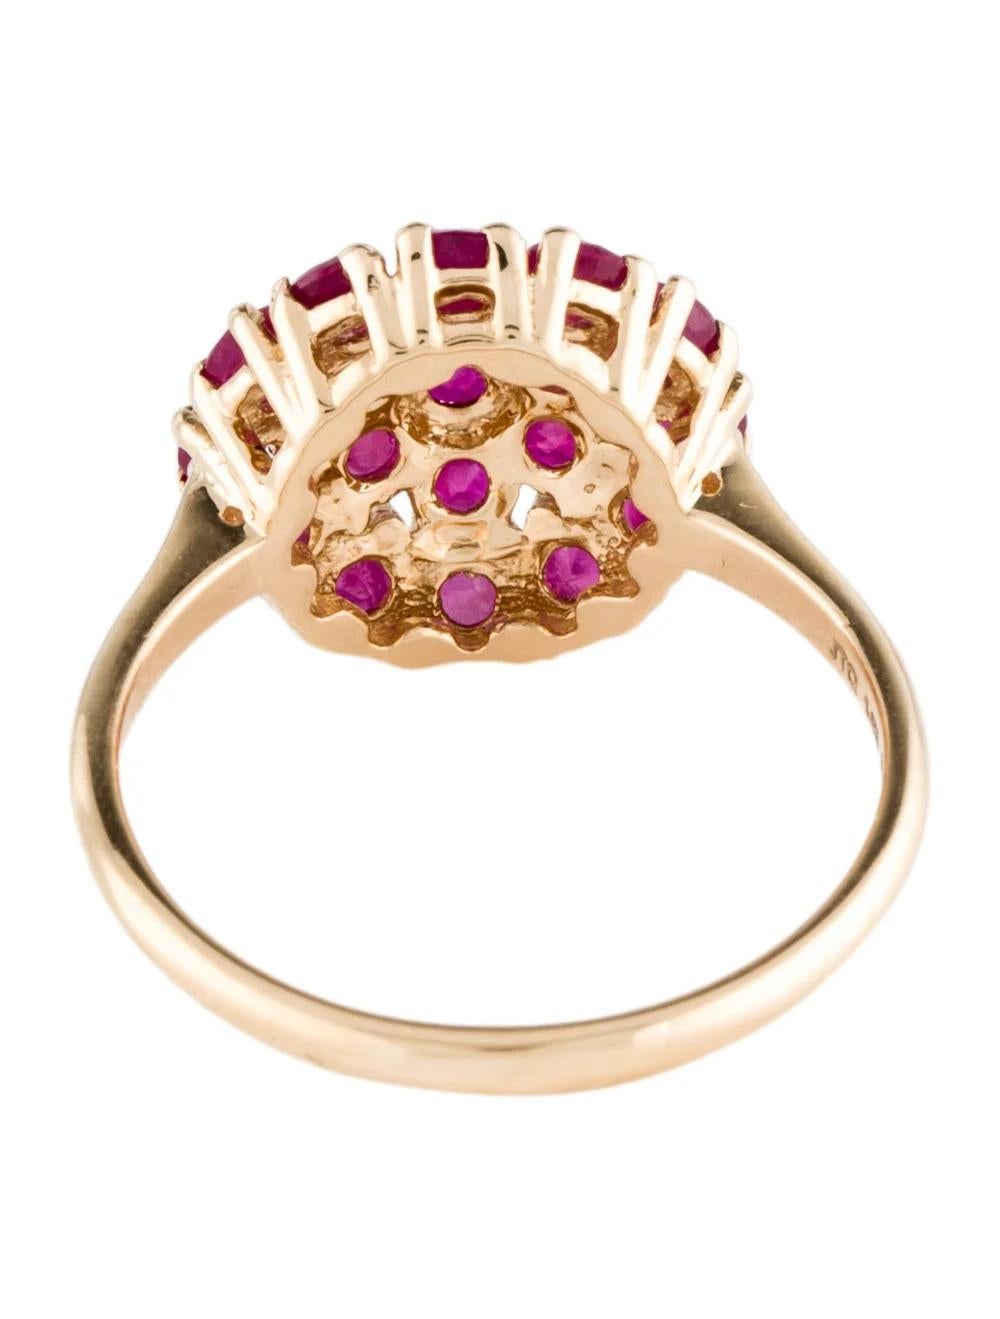 14K Ruby Cocktail Ring, Size 6.75: Elegant Design with Stunning Gemstone In New Condition For Sale In Holtsville, NY